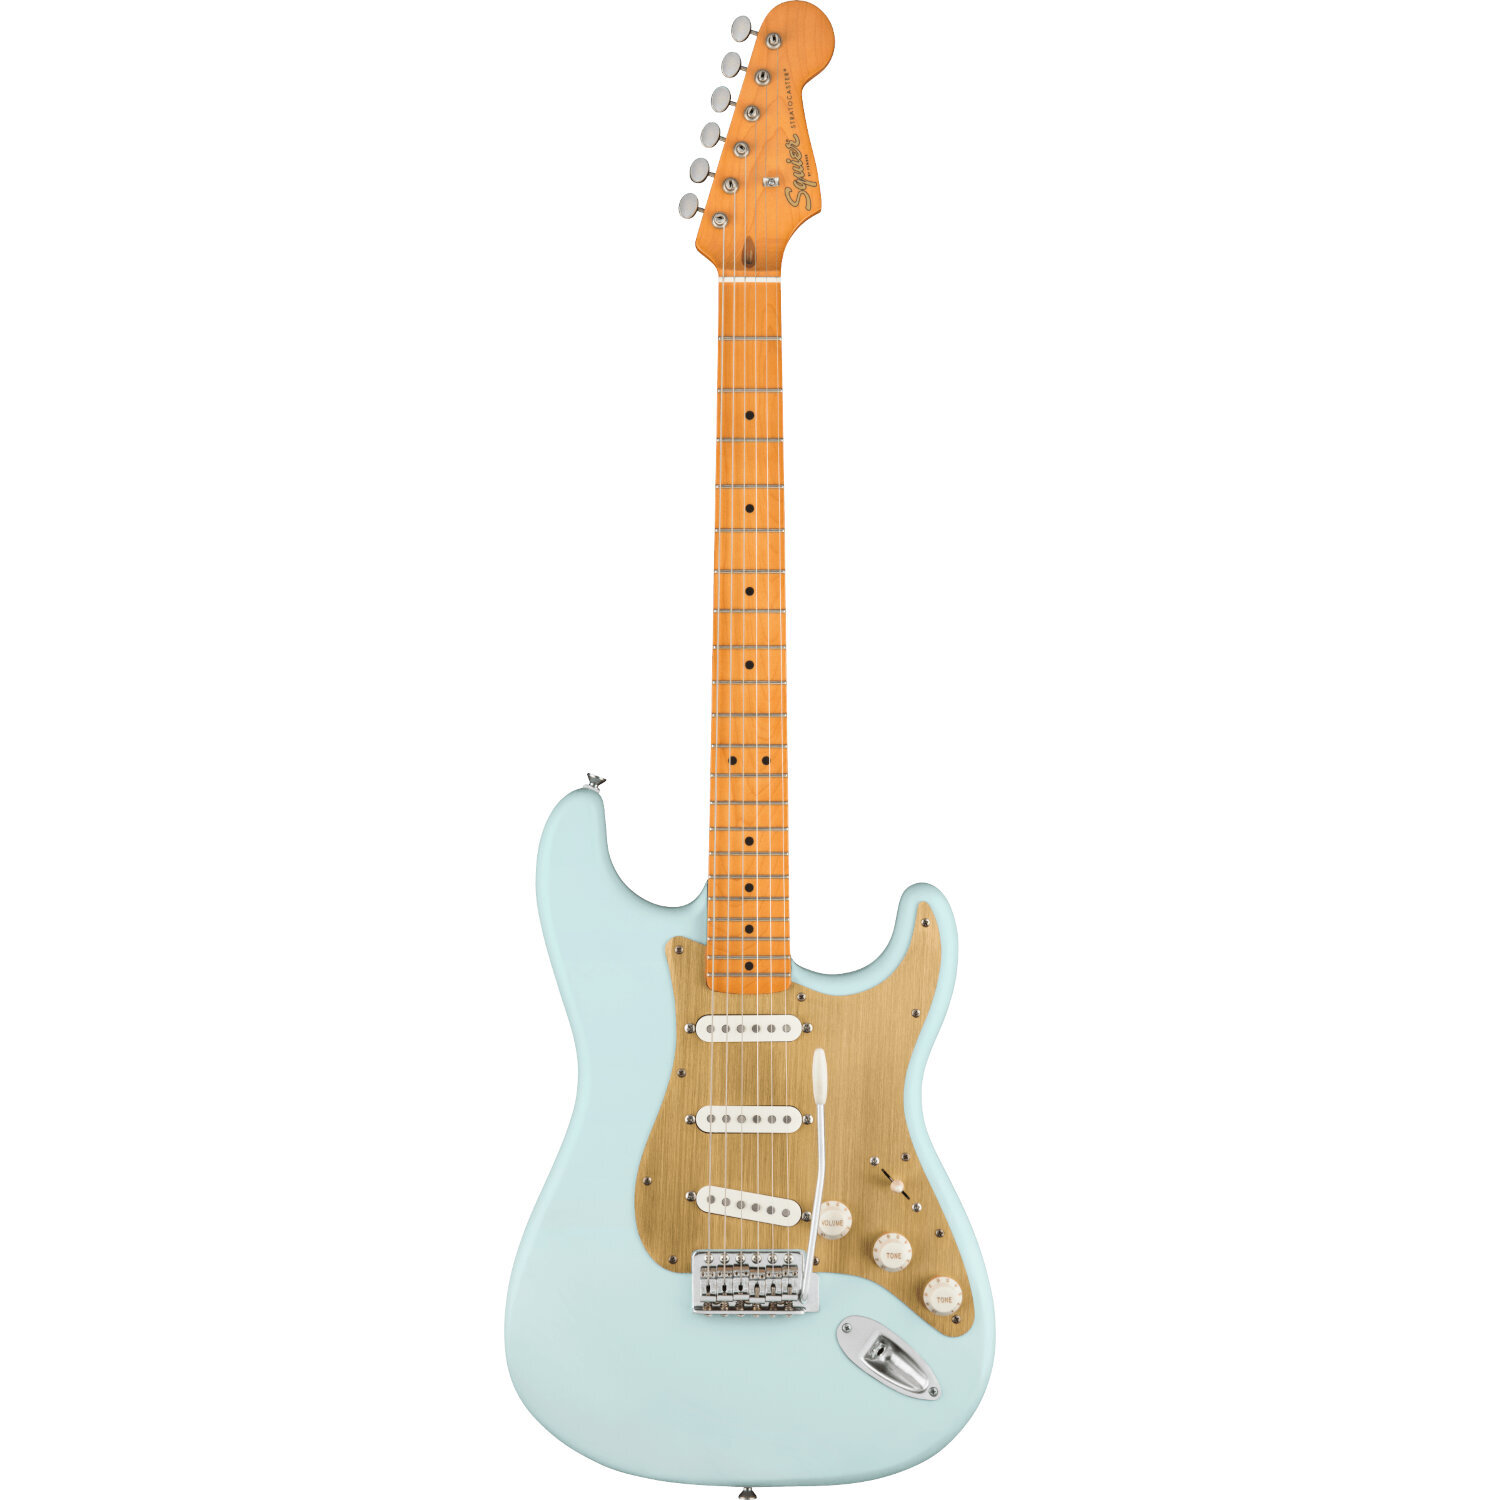 Squier 40th Anniversary Stratocaster Vintage Edition Satin Sonic